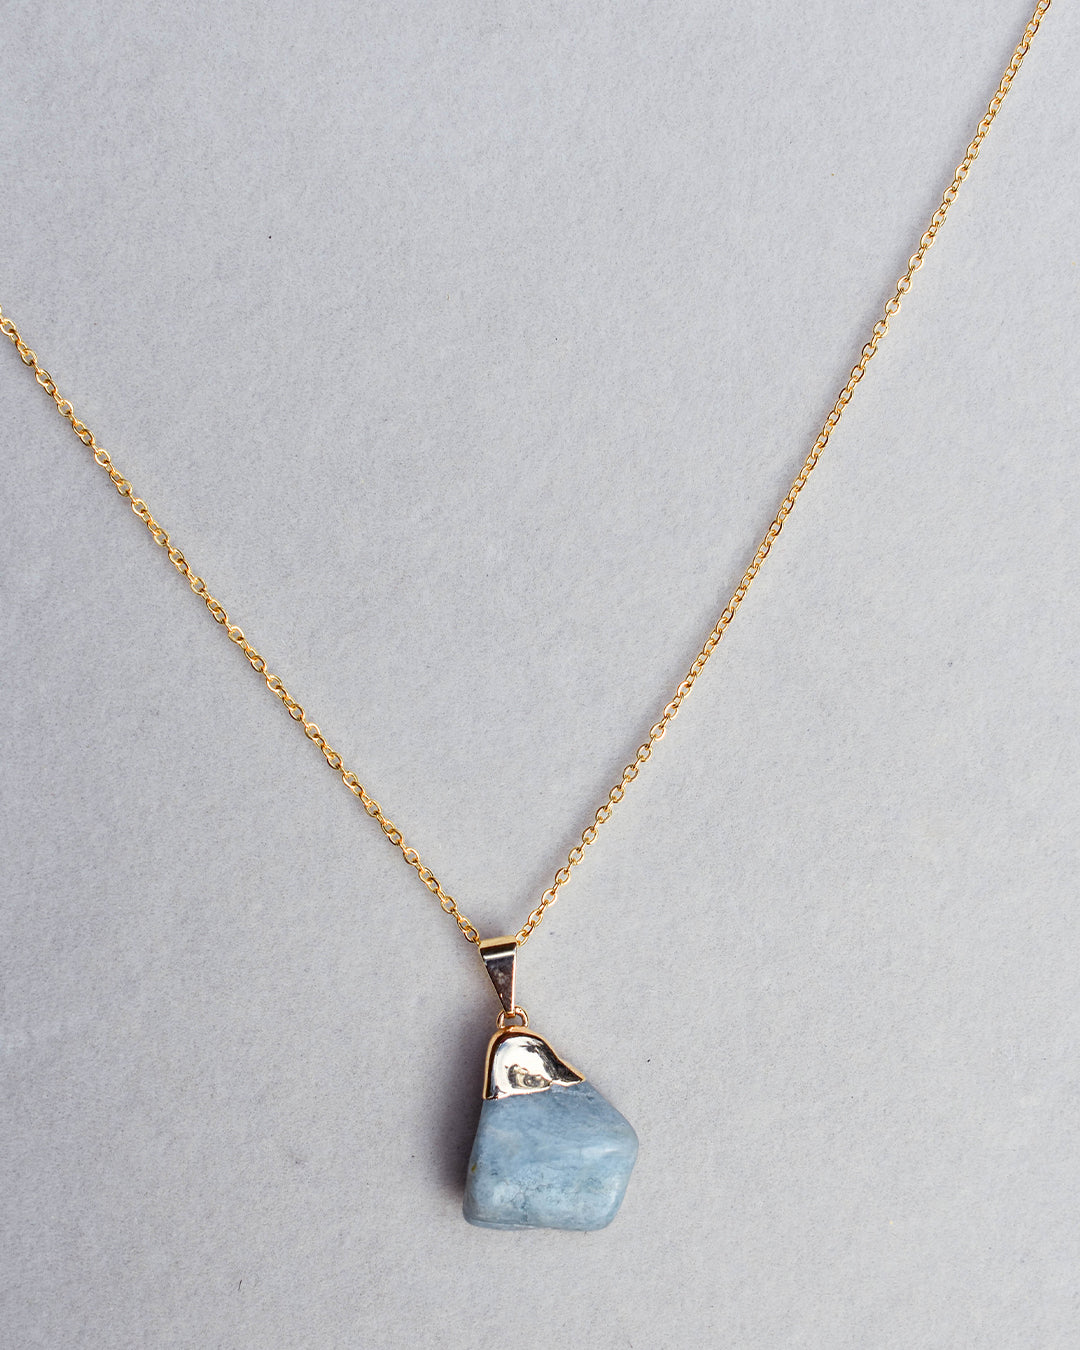 Gold Plated chain with Aquamarine Crystal pendant